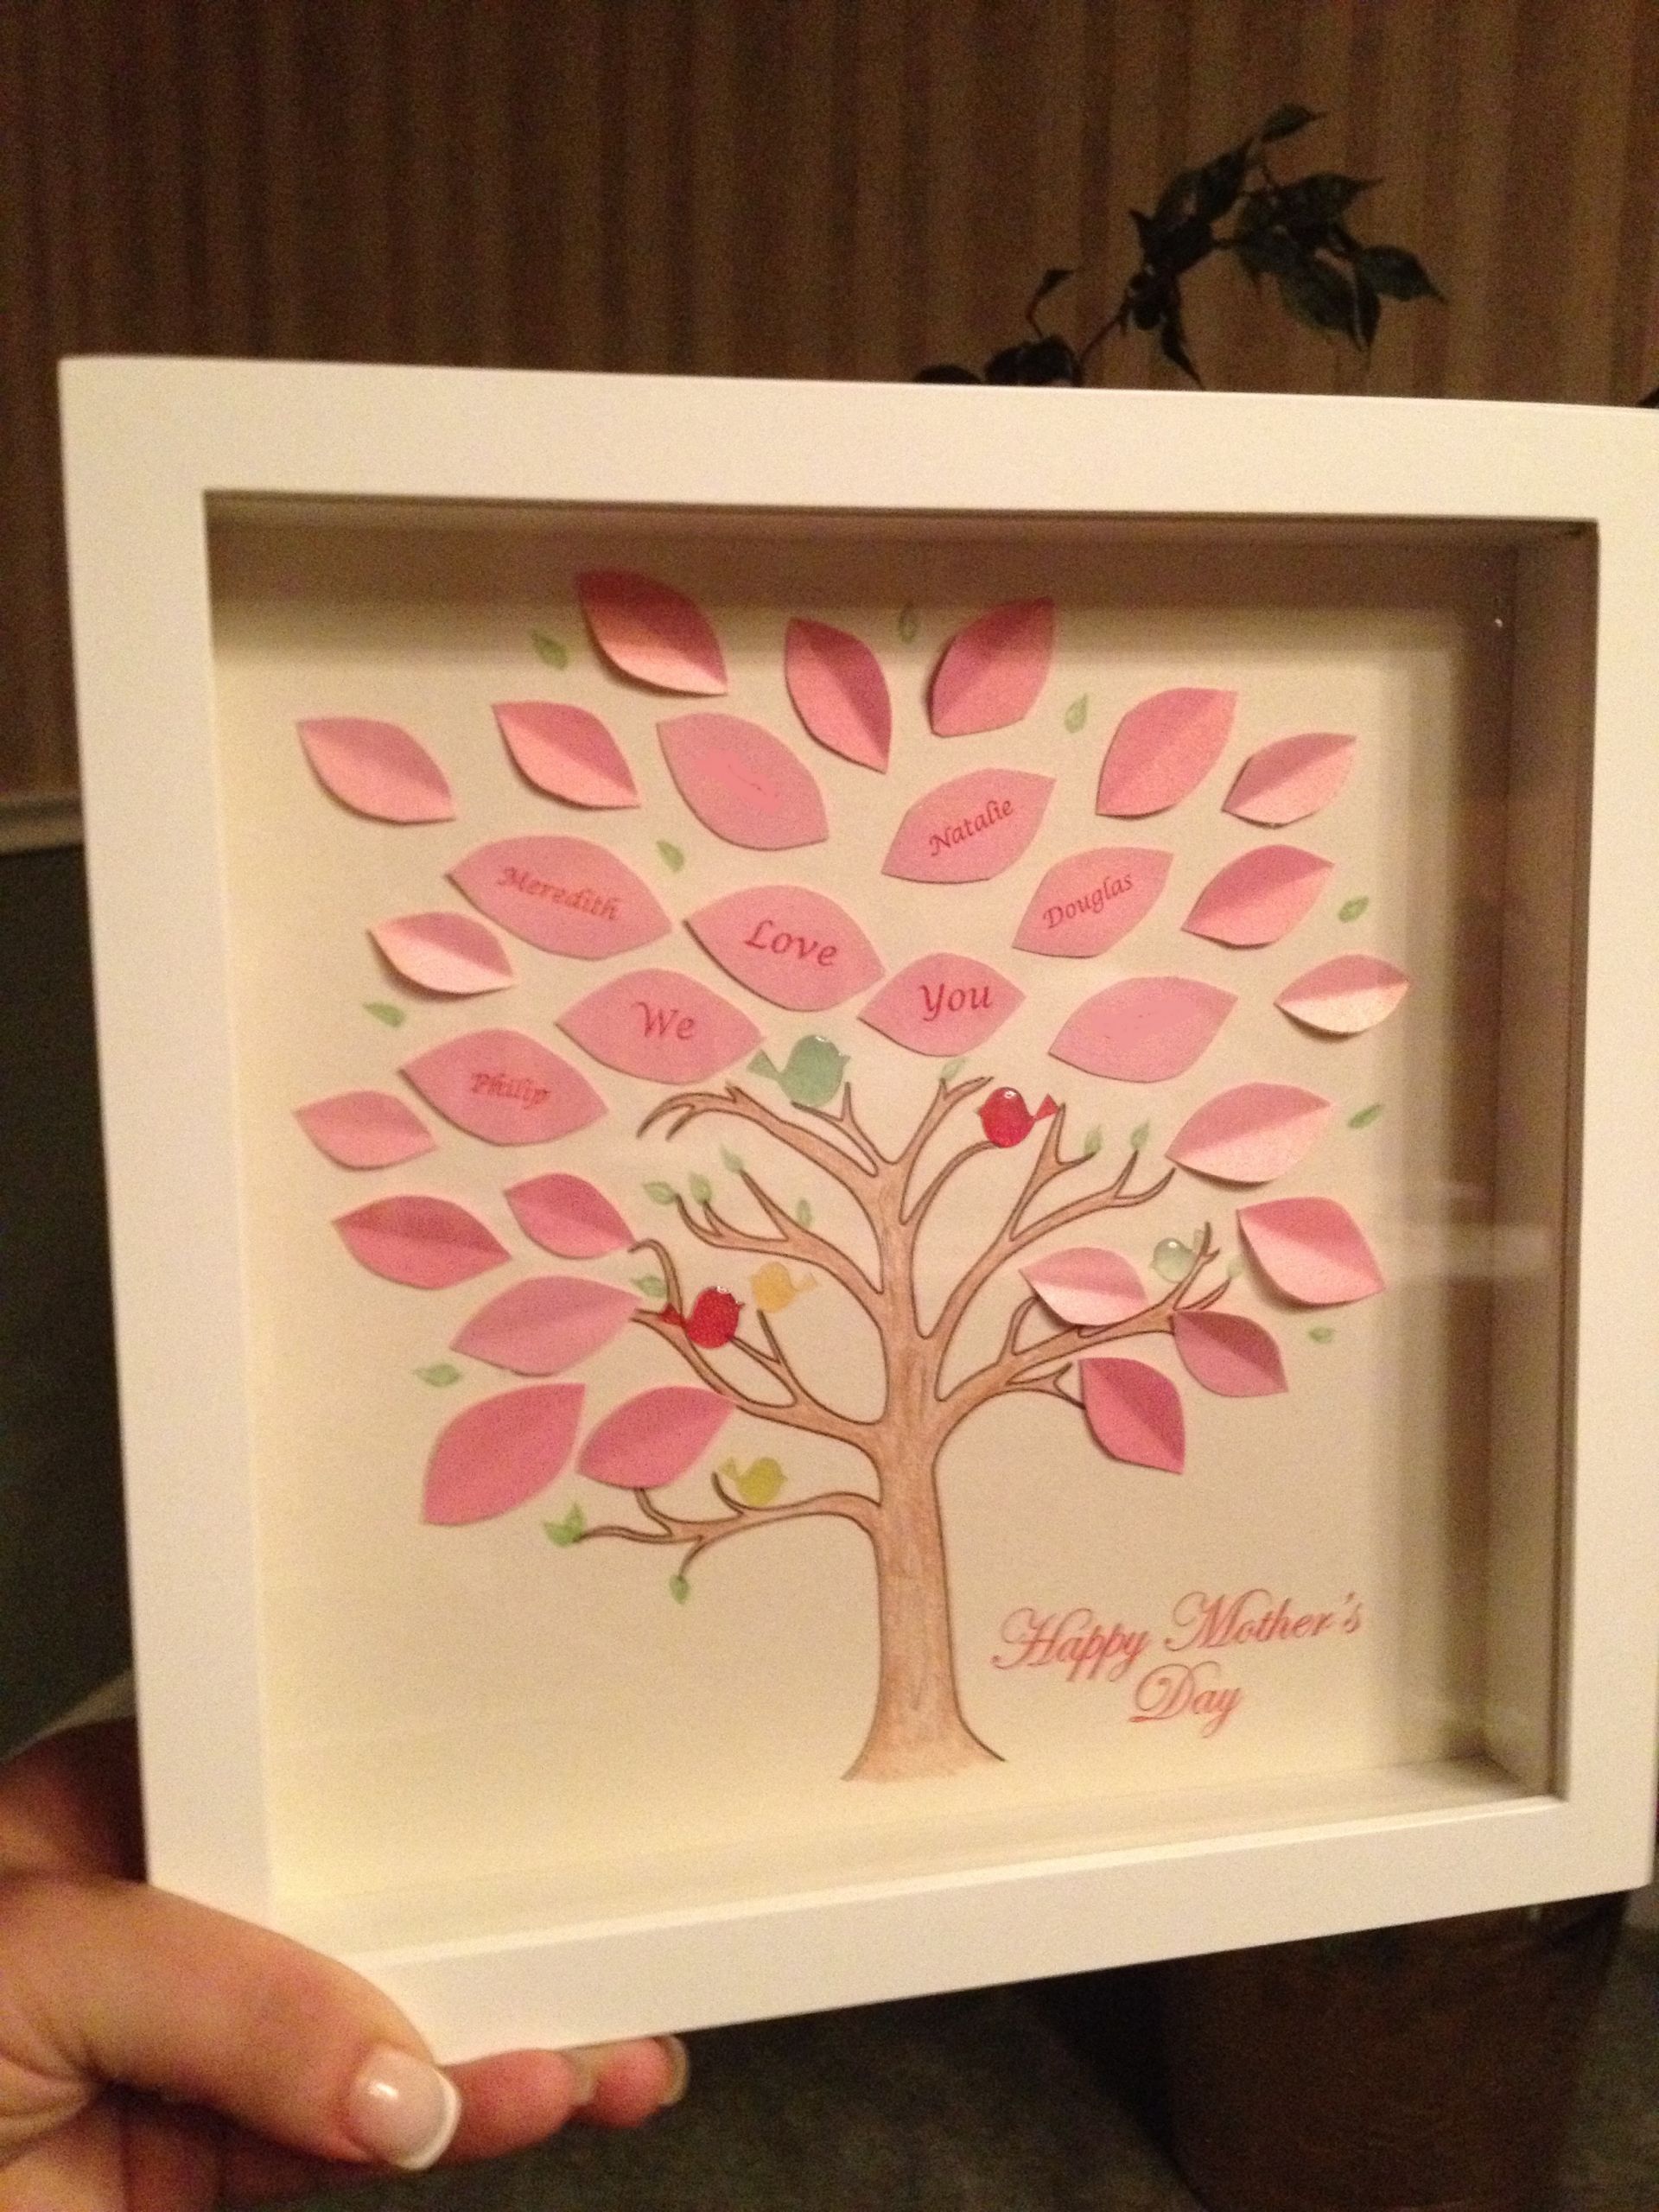 Mothers Day Diy Crafts
 Tree for Grandma My Mother’s Day DIY craft